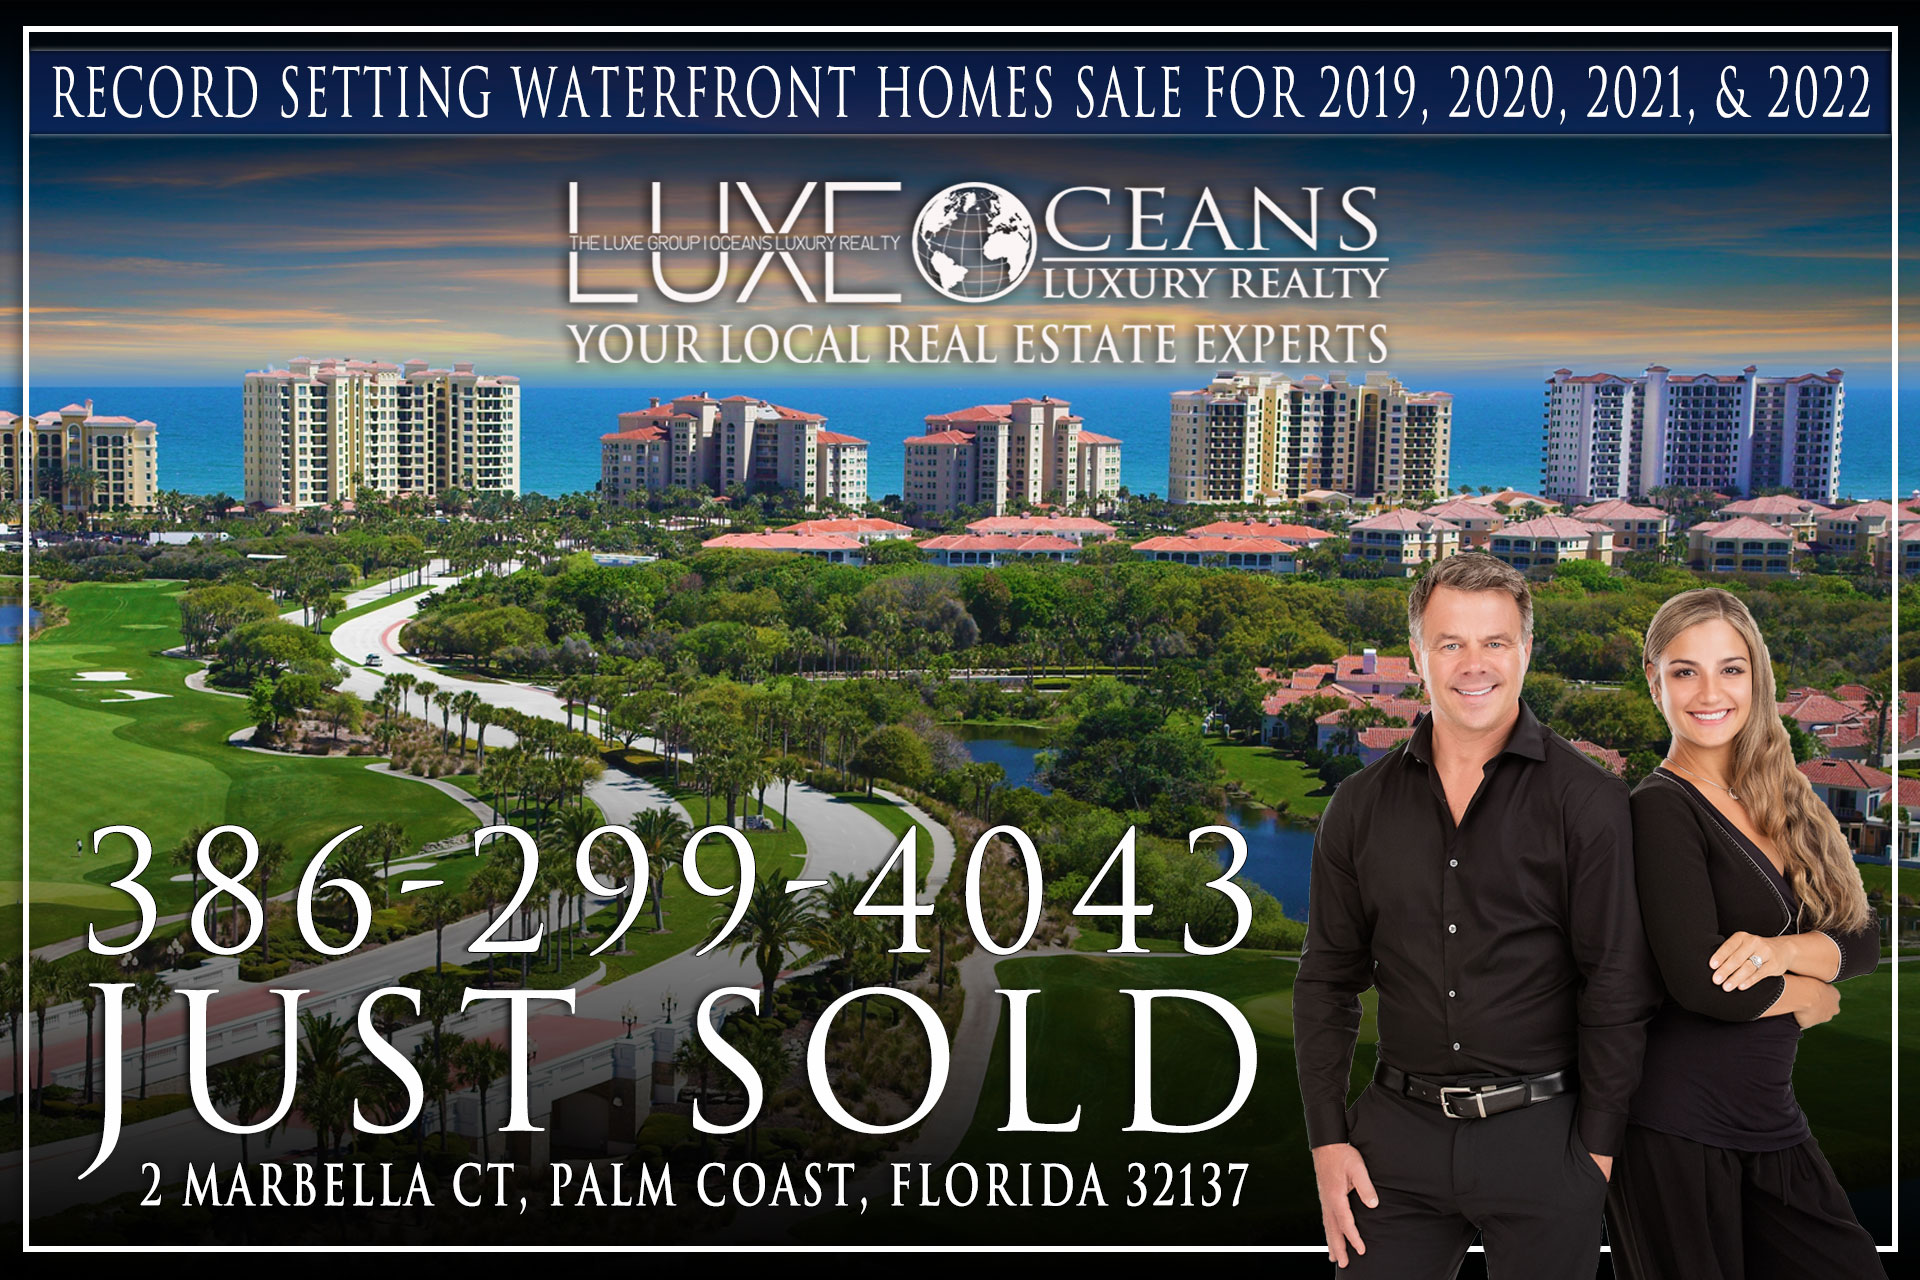 Hammock Dunes Homes For Sale - Just Sold - 2 Marbella Court Palm Coast Florida Golfing Community Home. The LUXE Group at Oceans Luxury Realty 386-299-4043